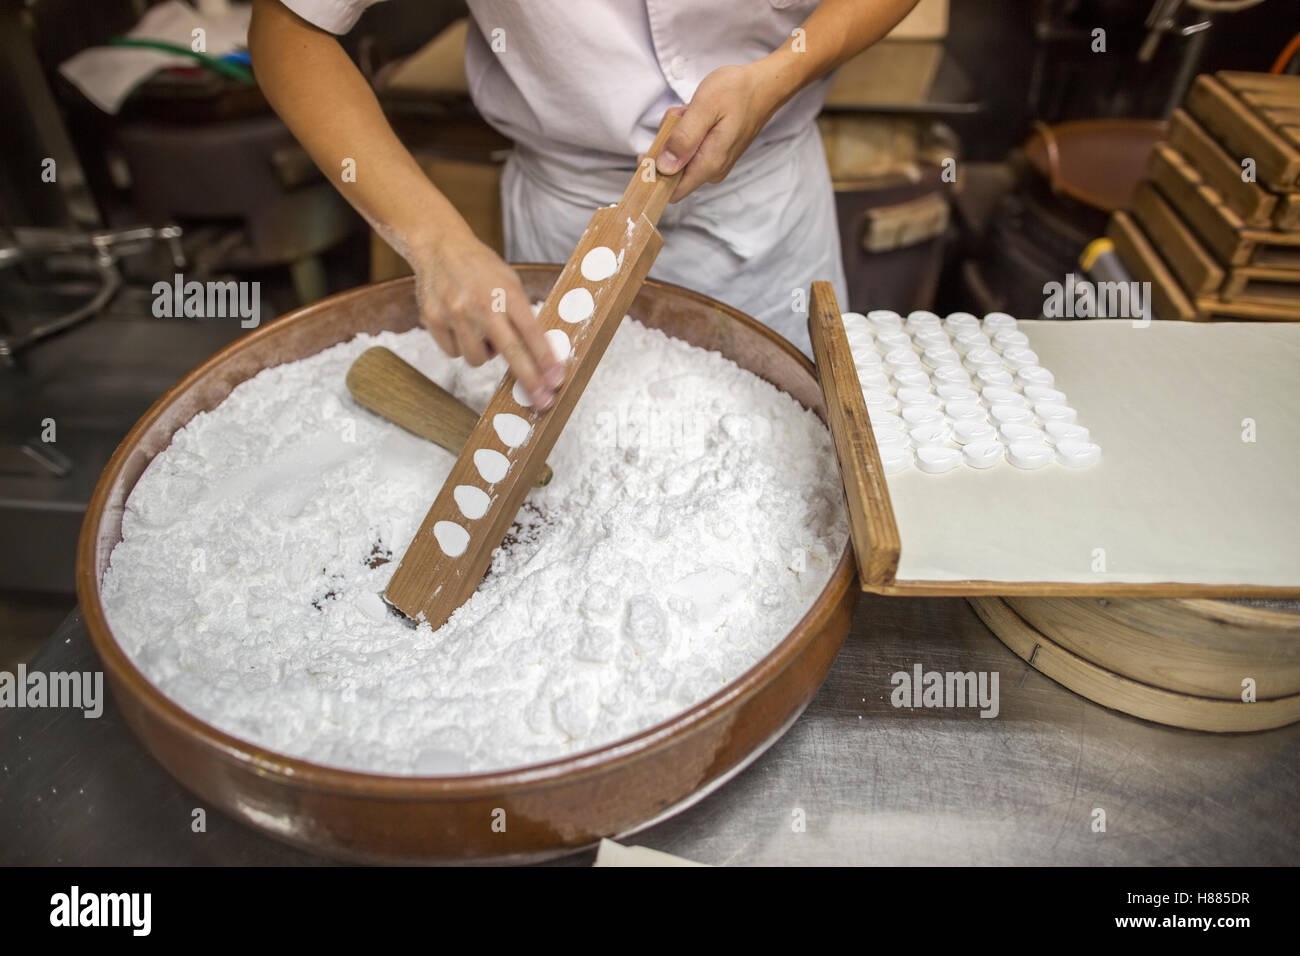 A small artisan producer of wagashi pressing the mixed dough into moulds Stock Photo